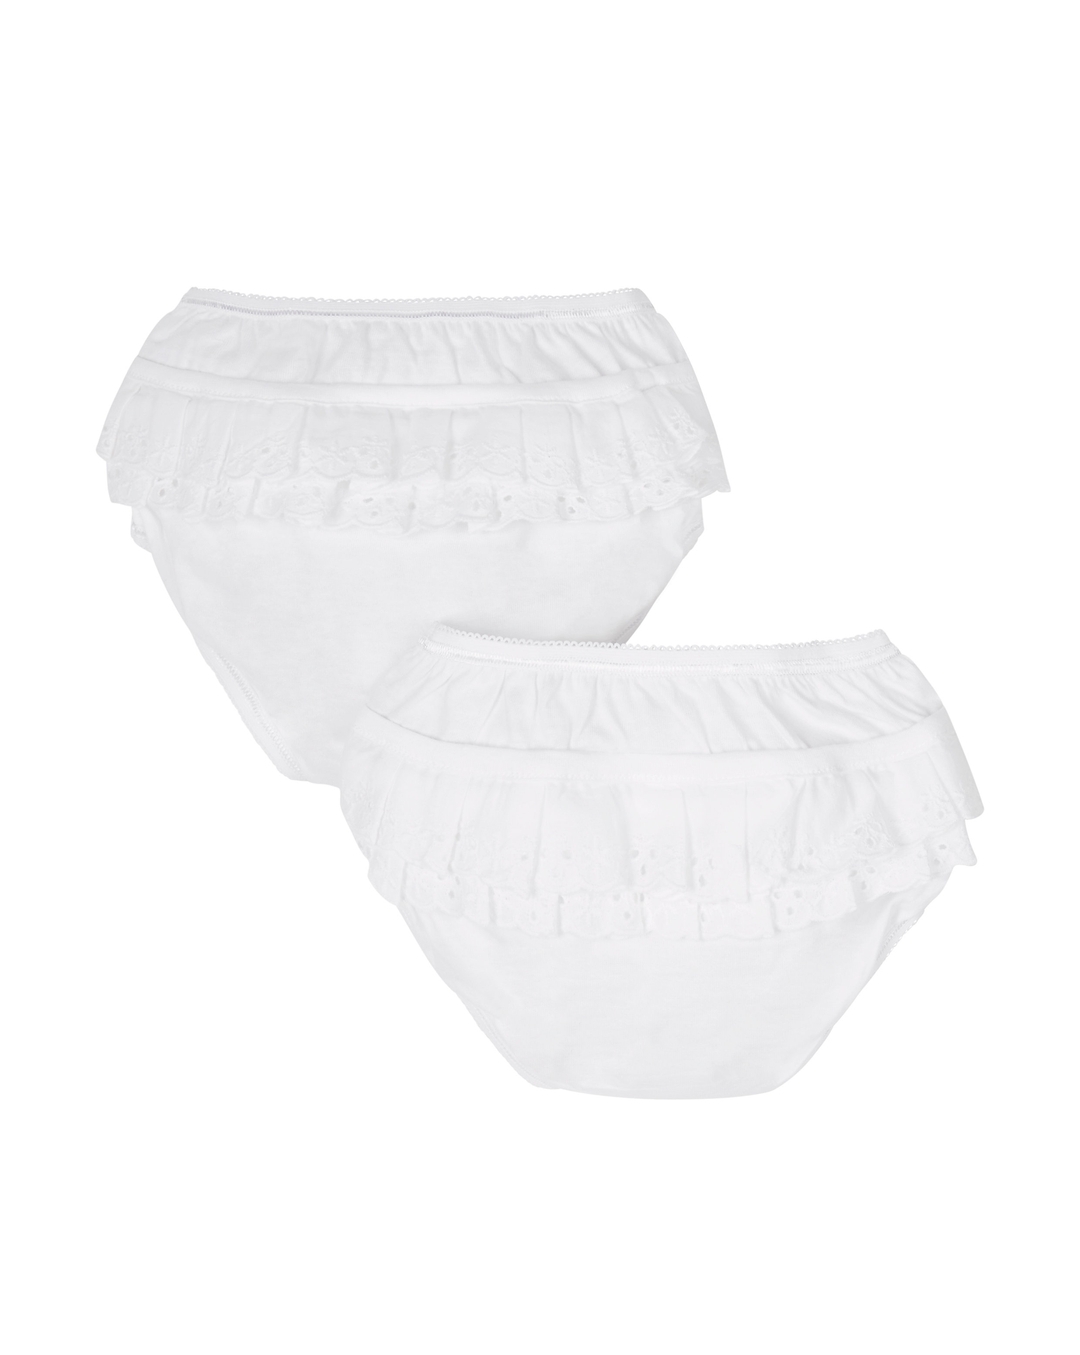 White Frilly Nappy Cover Briefs